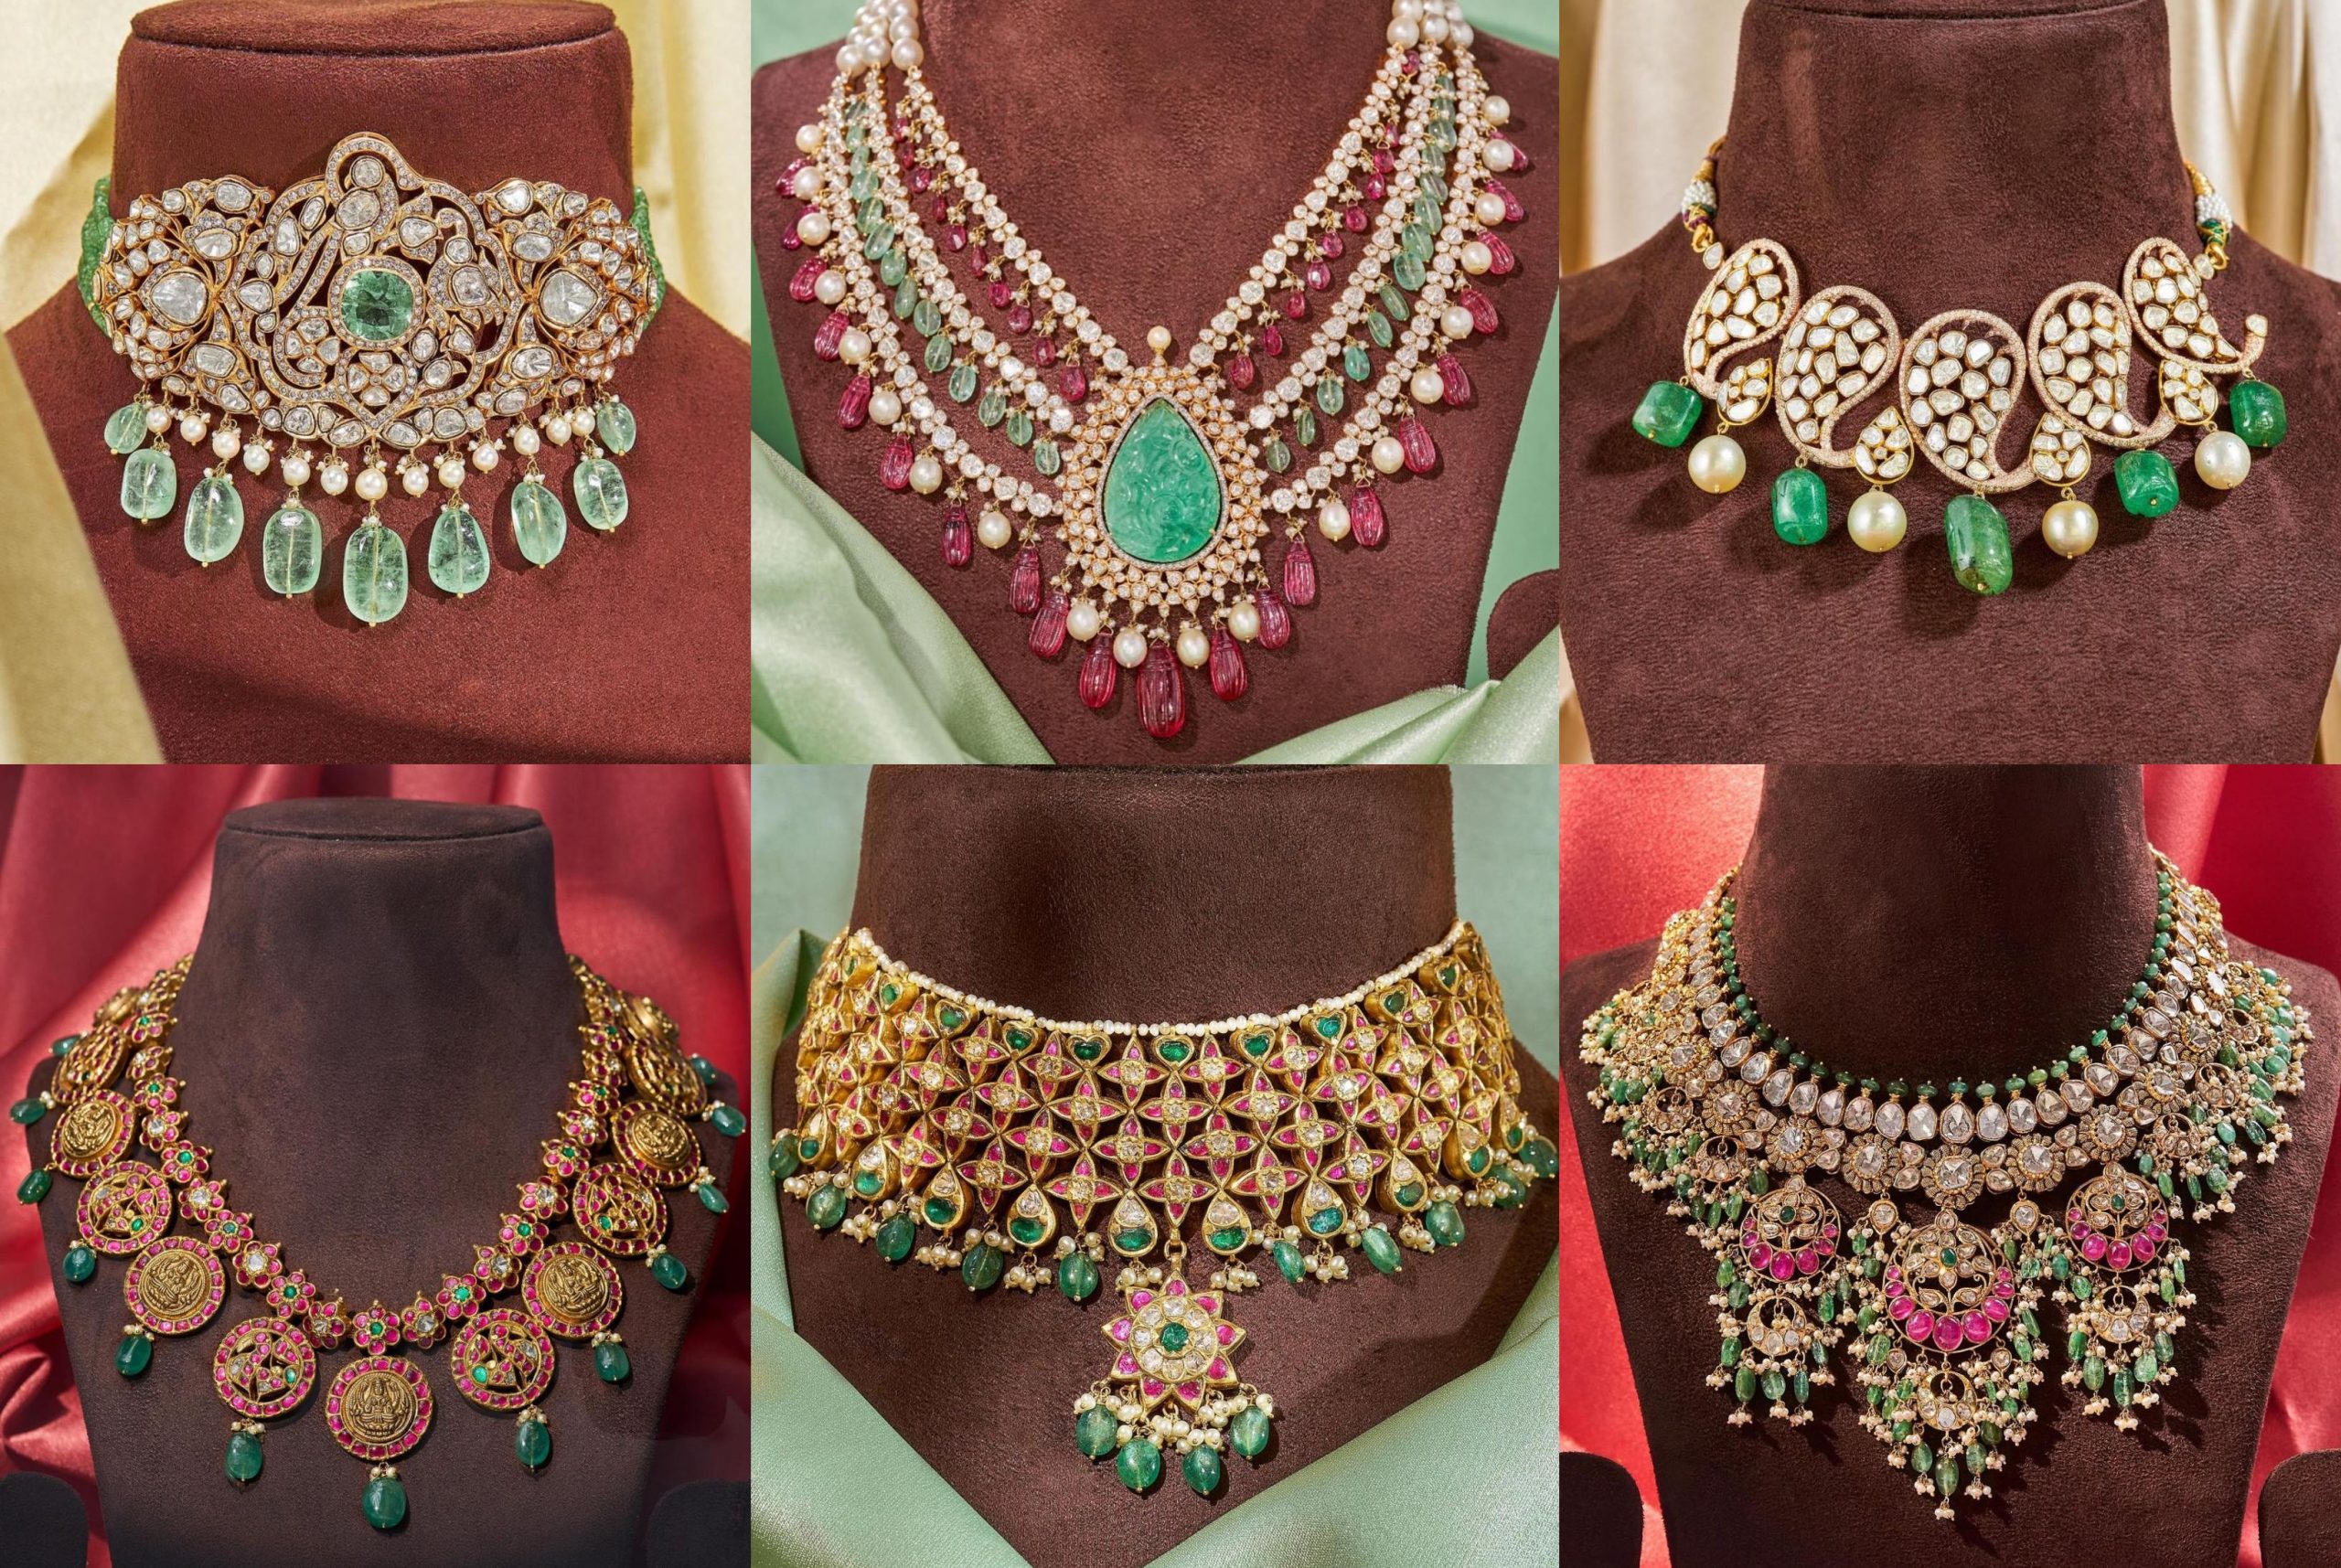 Stunning Precious Stones Necklace Collection By Parnicaa!